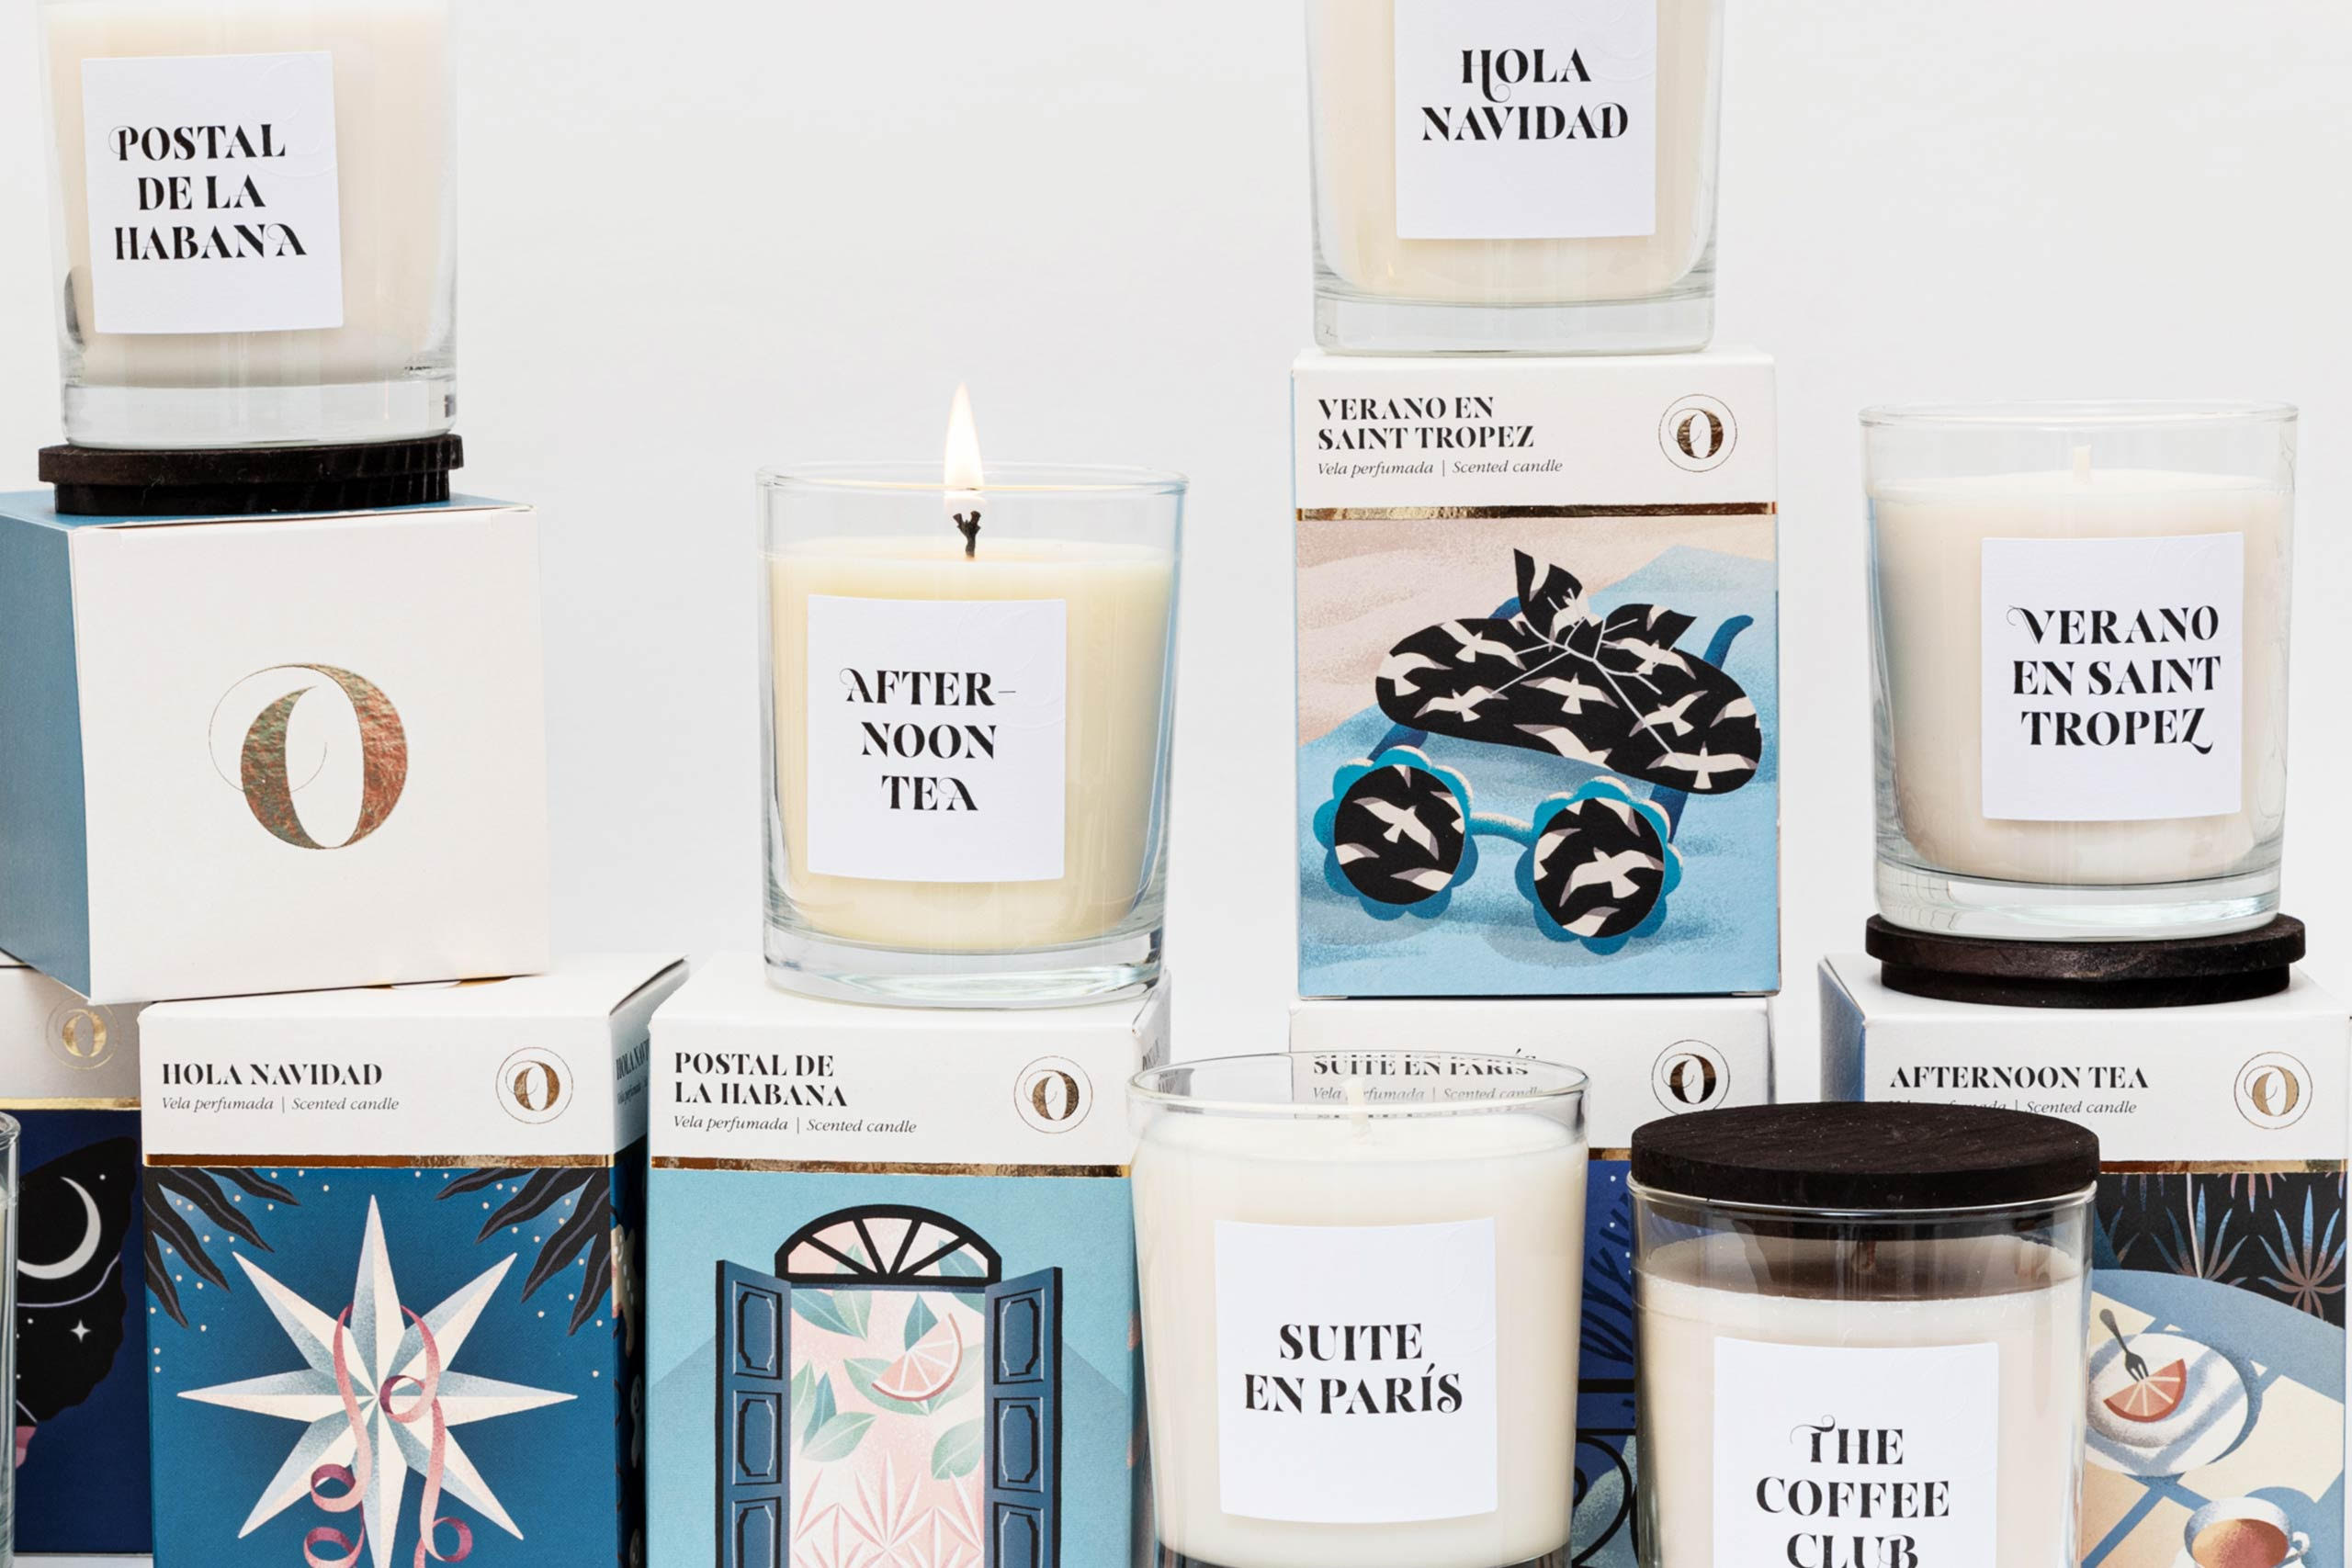 Packaging design by Marina Goñi Studio for the candle collection of The Singular Olivia